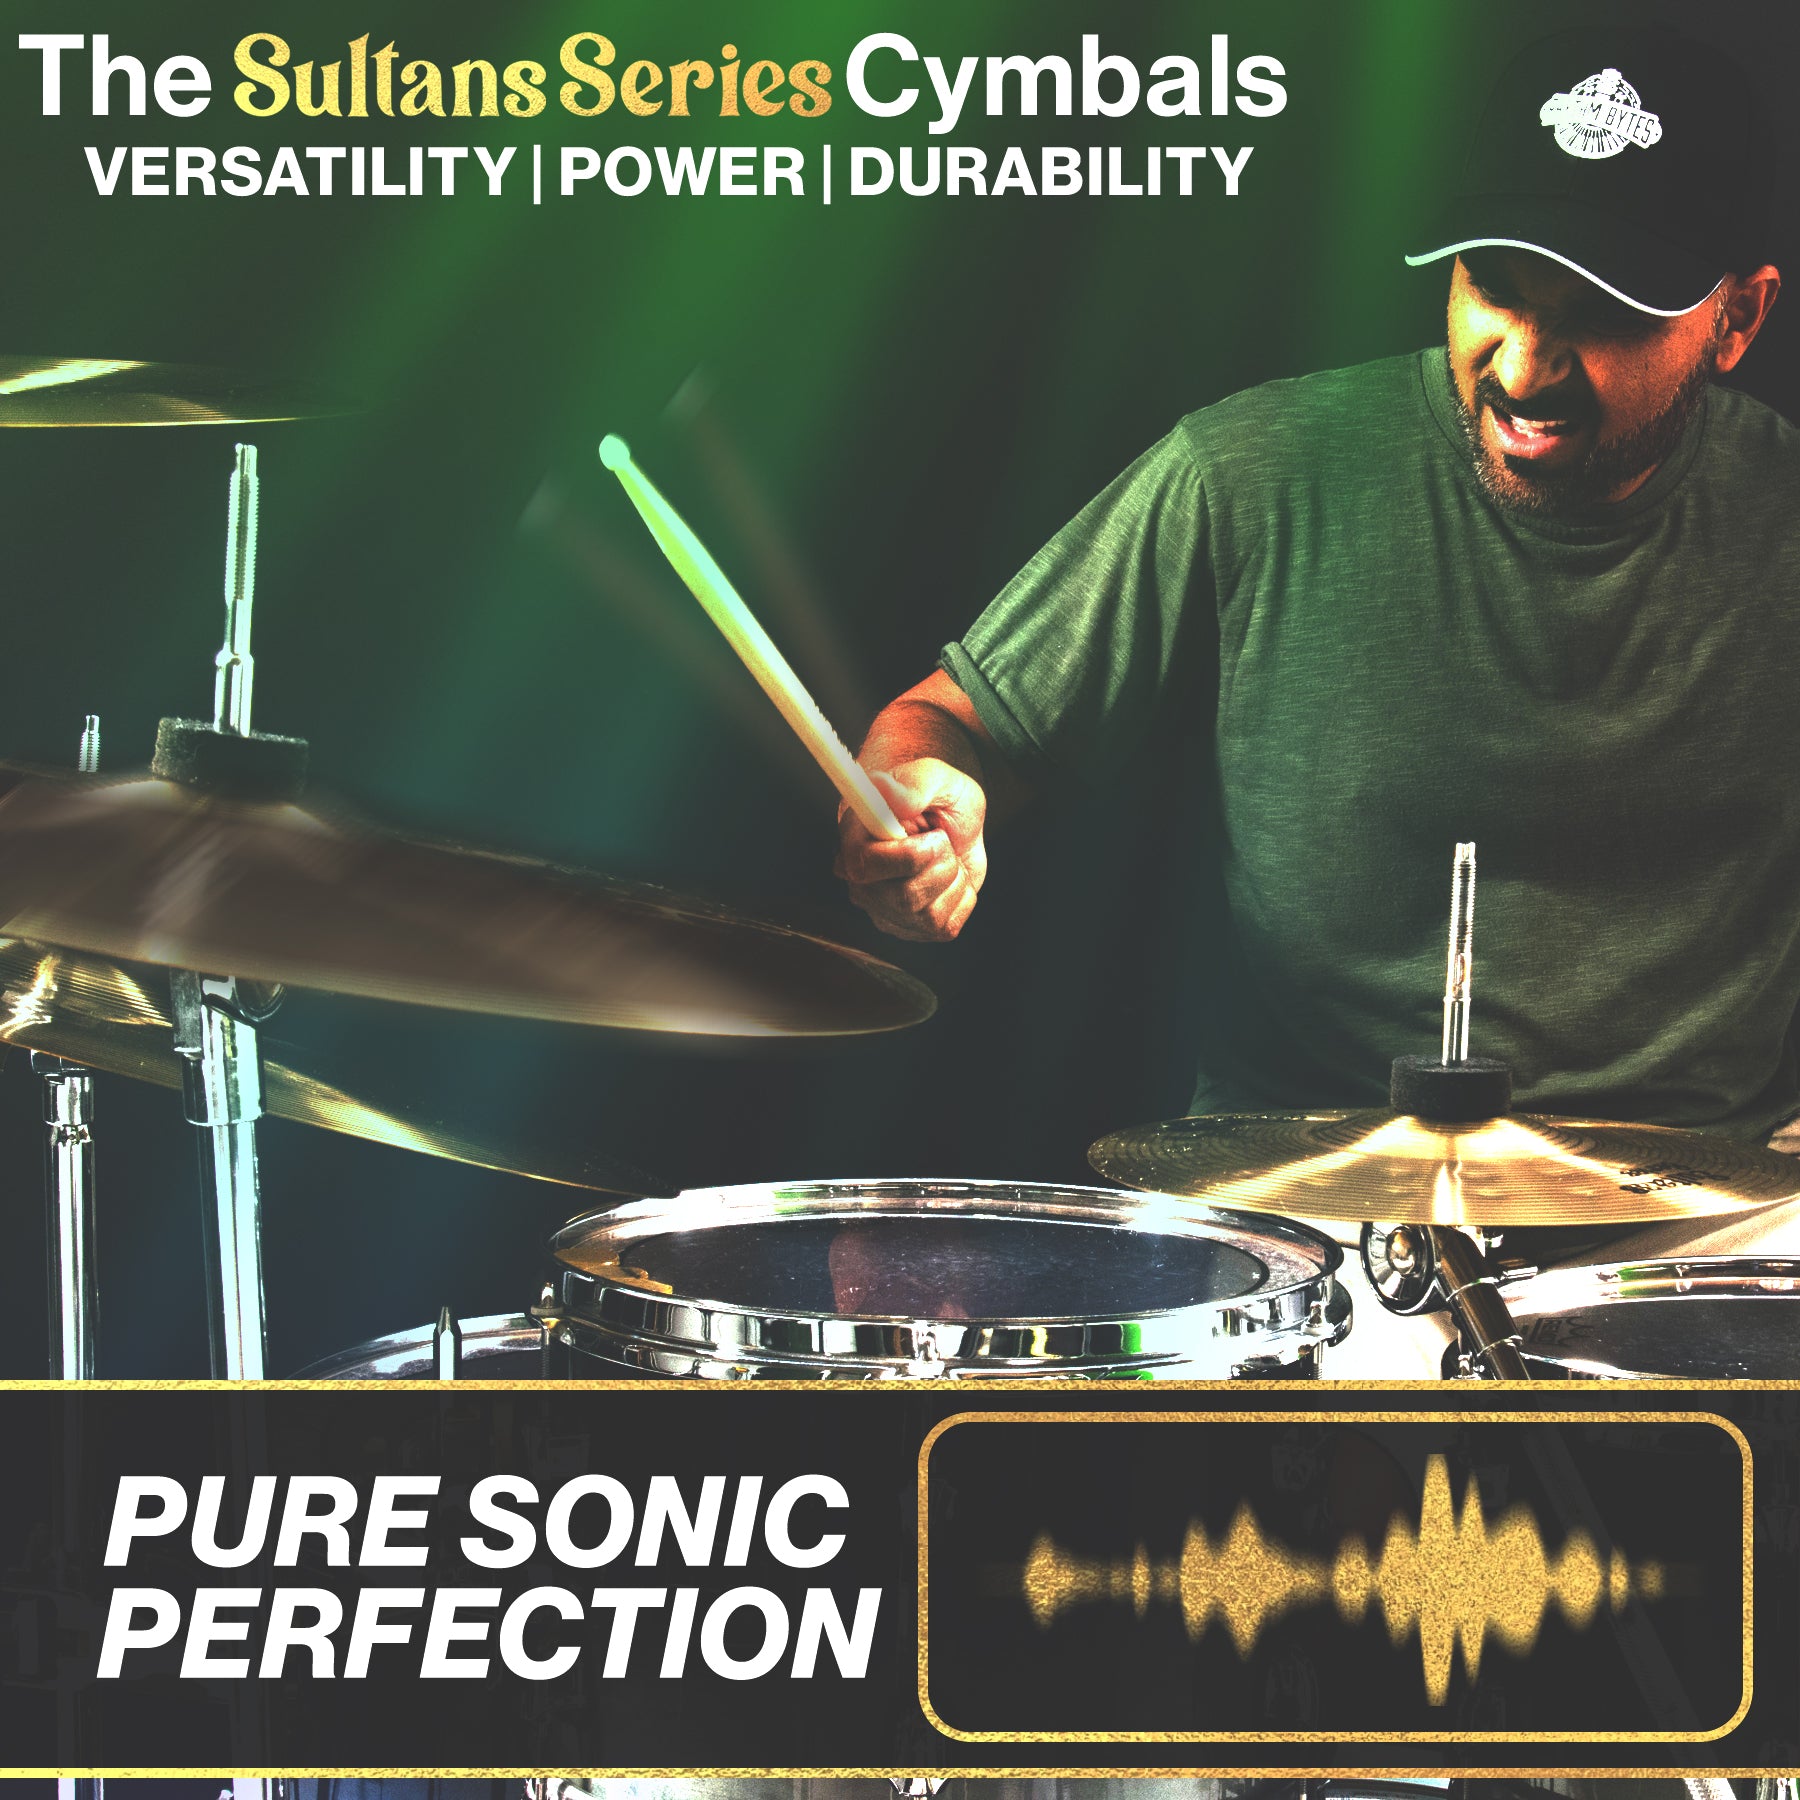 Rhythm Bytes Cymbal Set for Drums | New Sultans Series 7 pcs Cymbals P